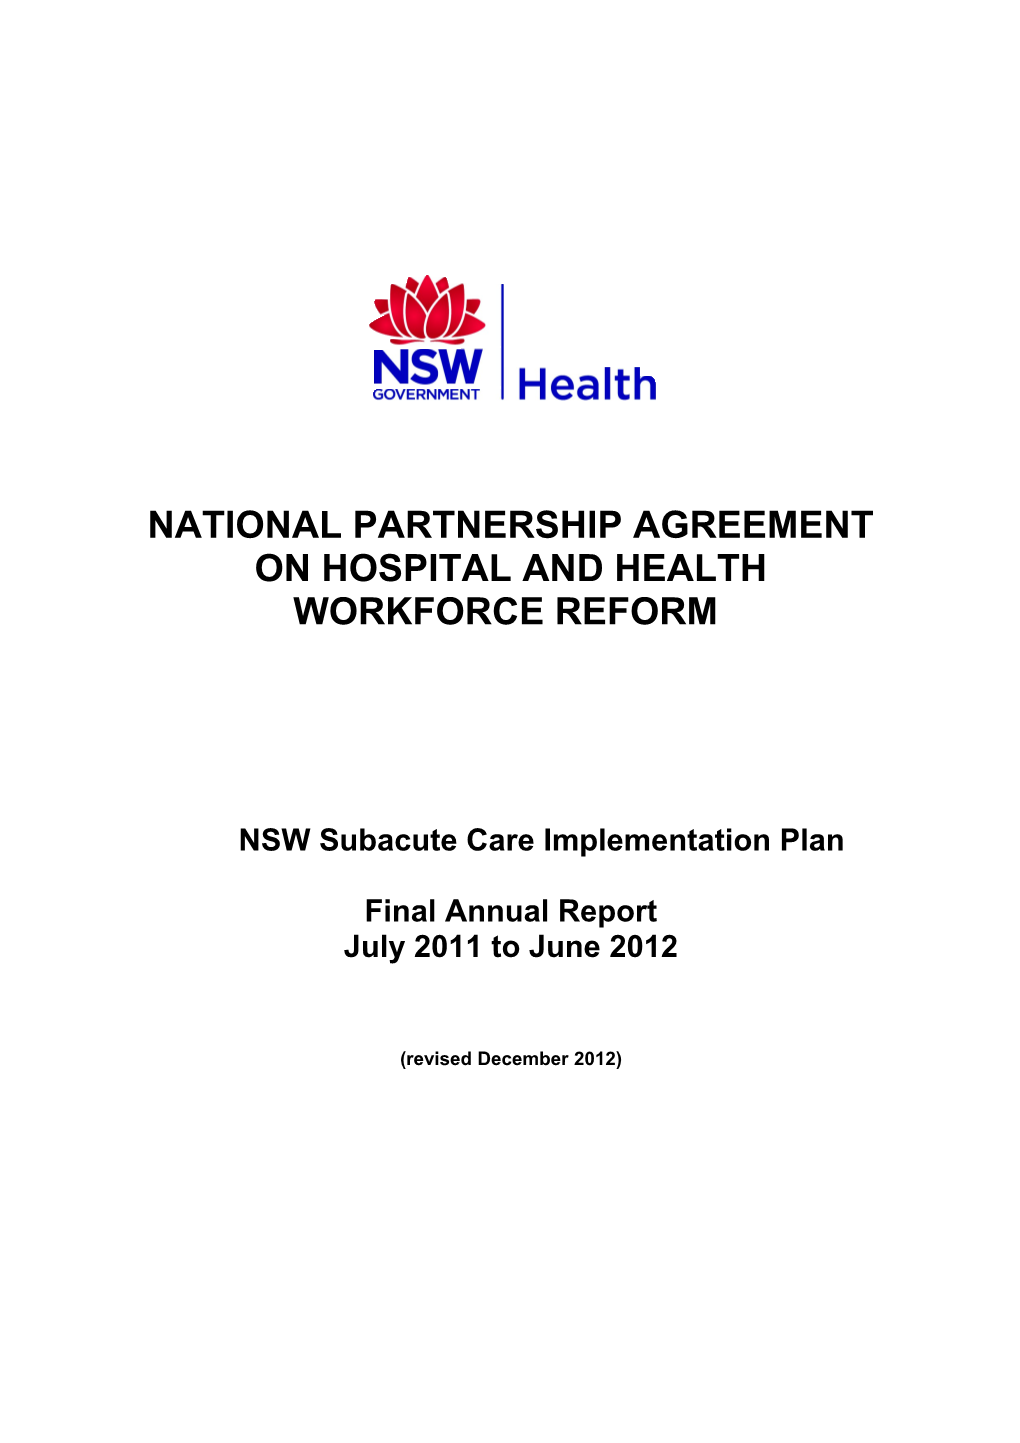 New South Wales - July 2011 to June 2012 - Progress Against Subacute Care Implementation